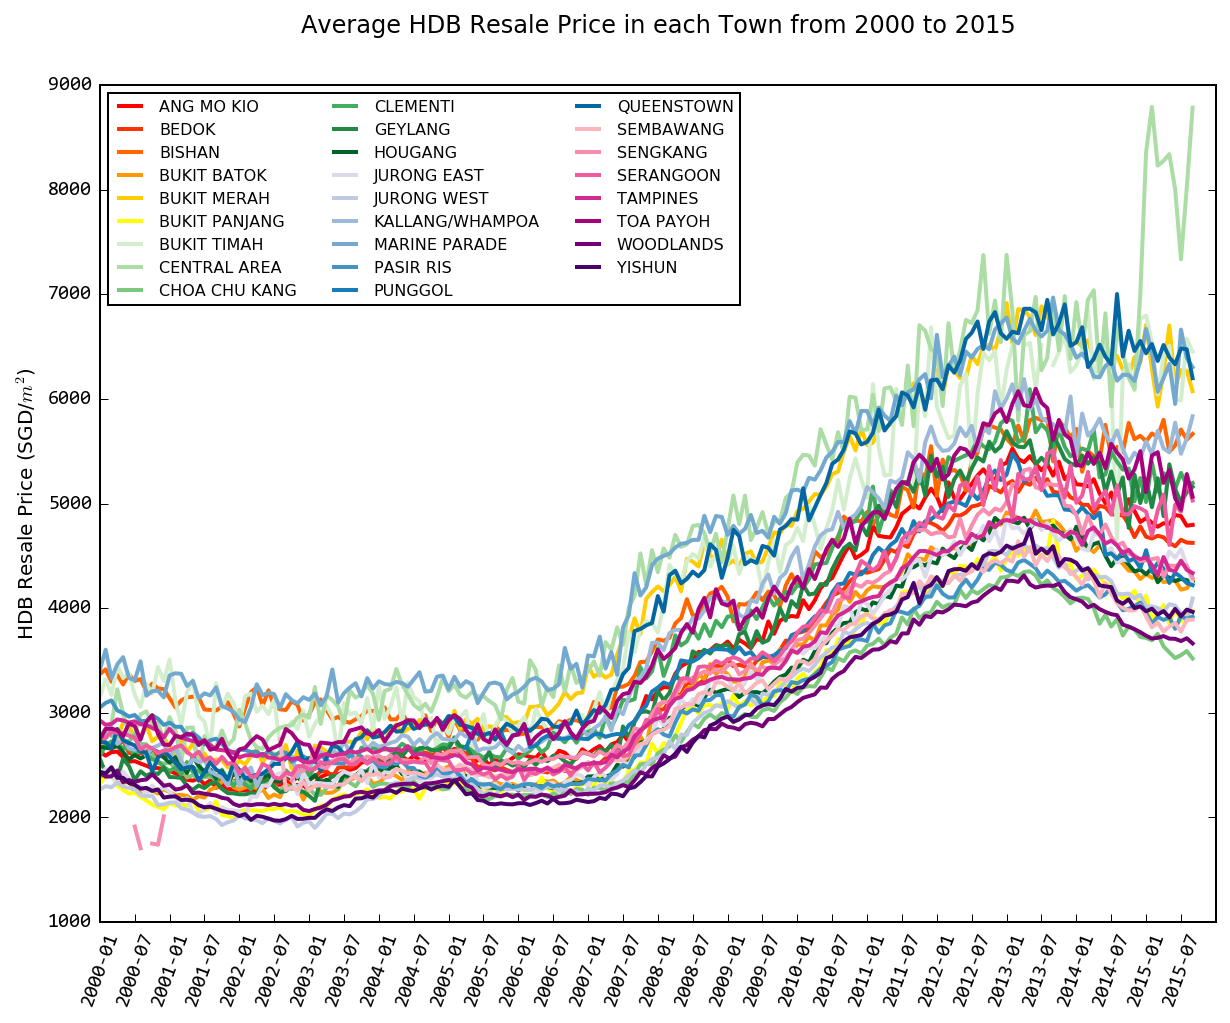 Average HDB Resale Price in each Town from 2000 to 2015